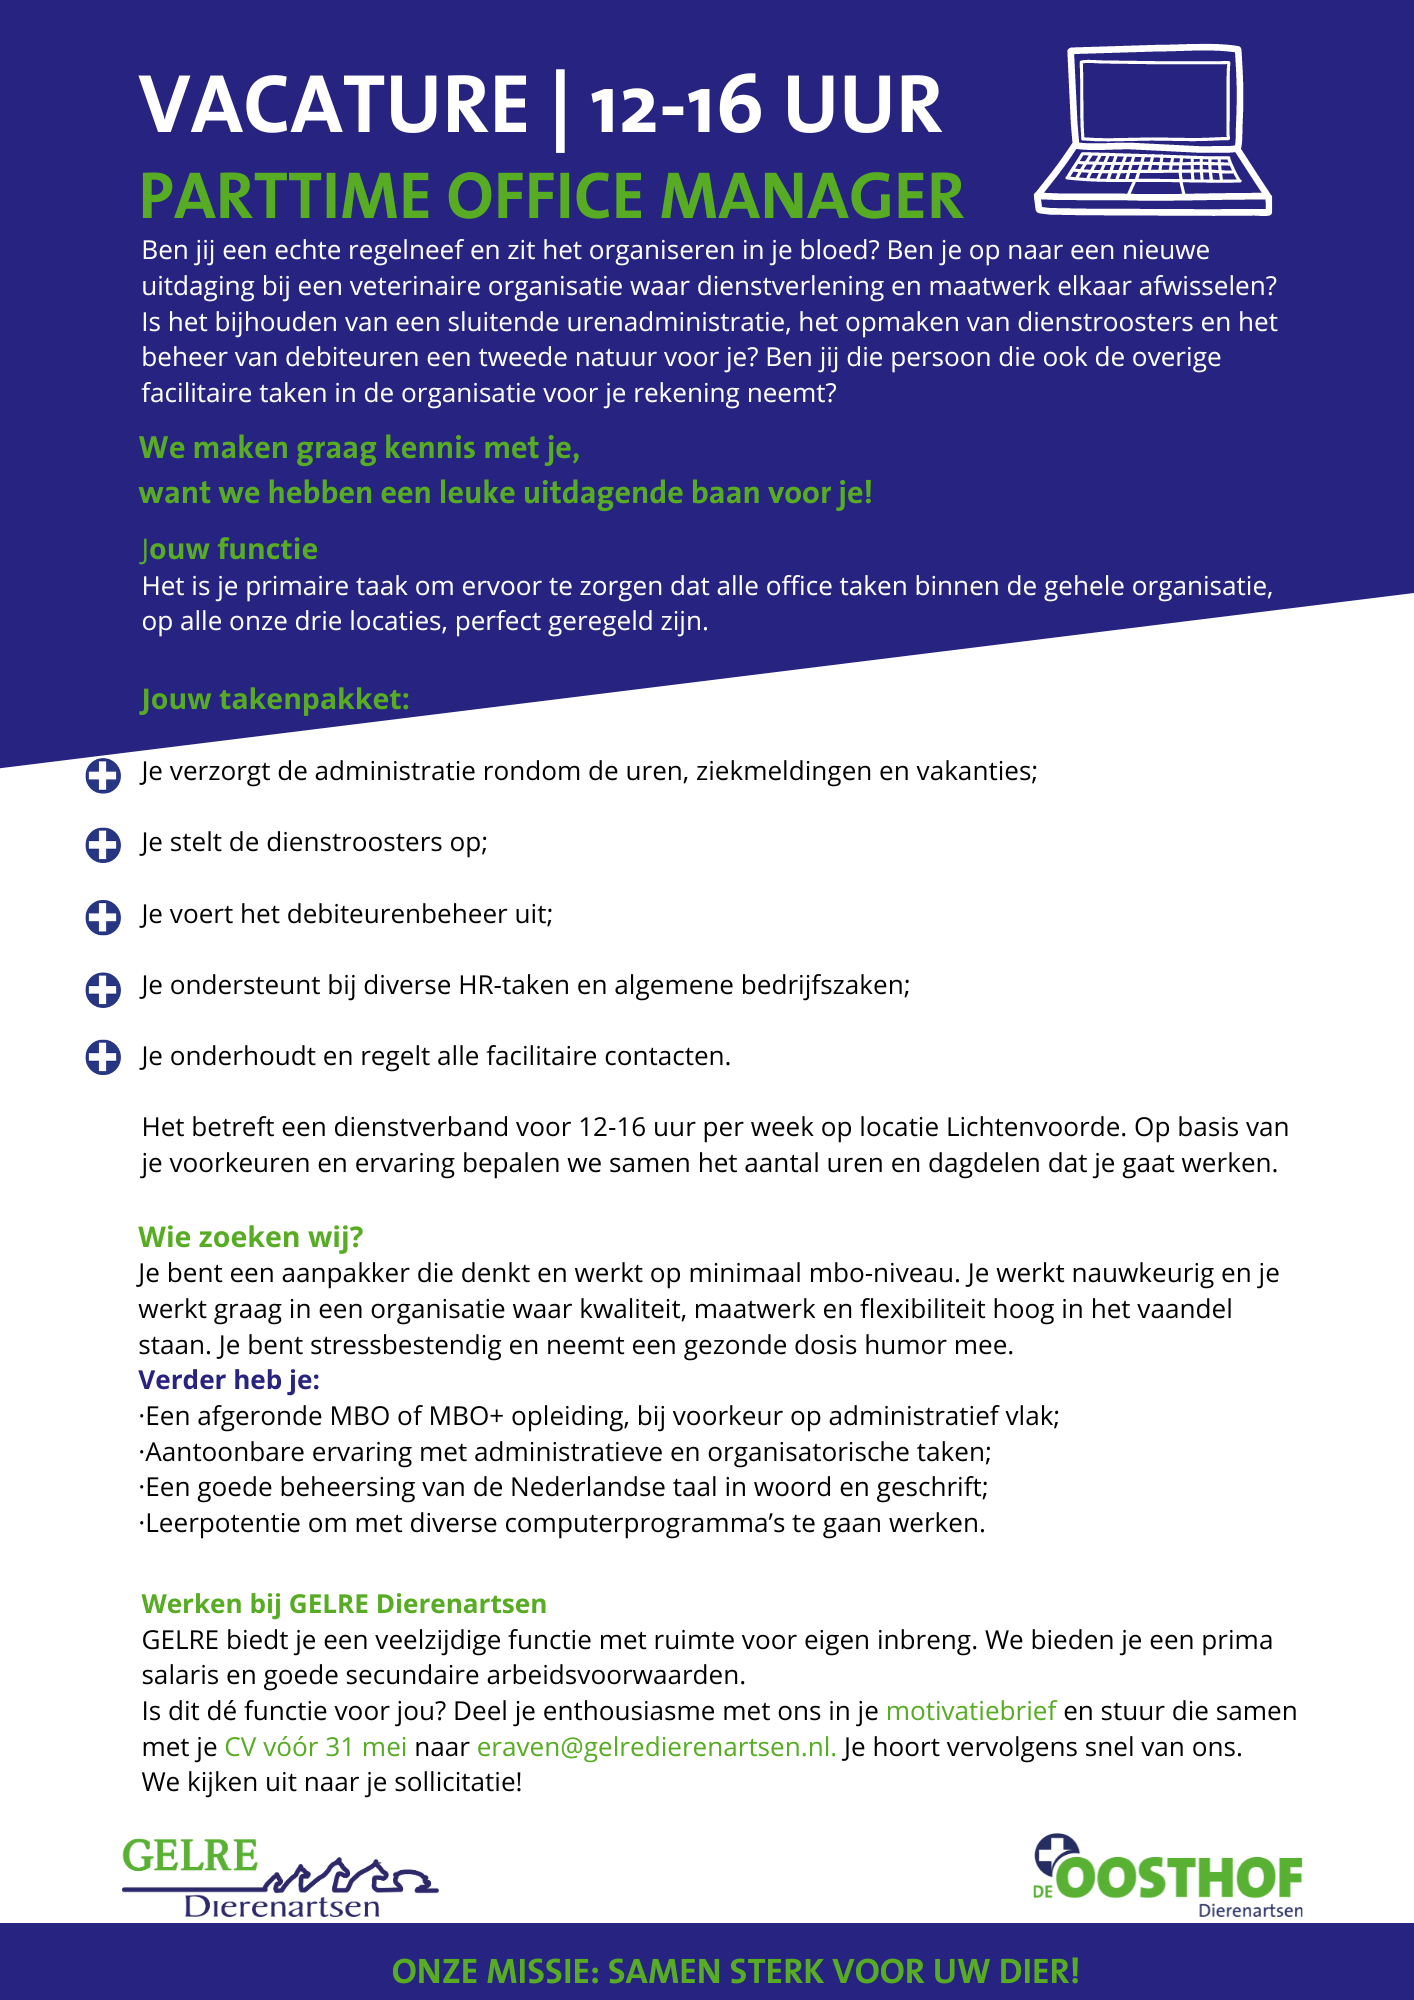 Vacature office manager GELRE | De Oosthof